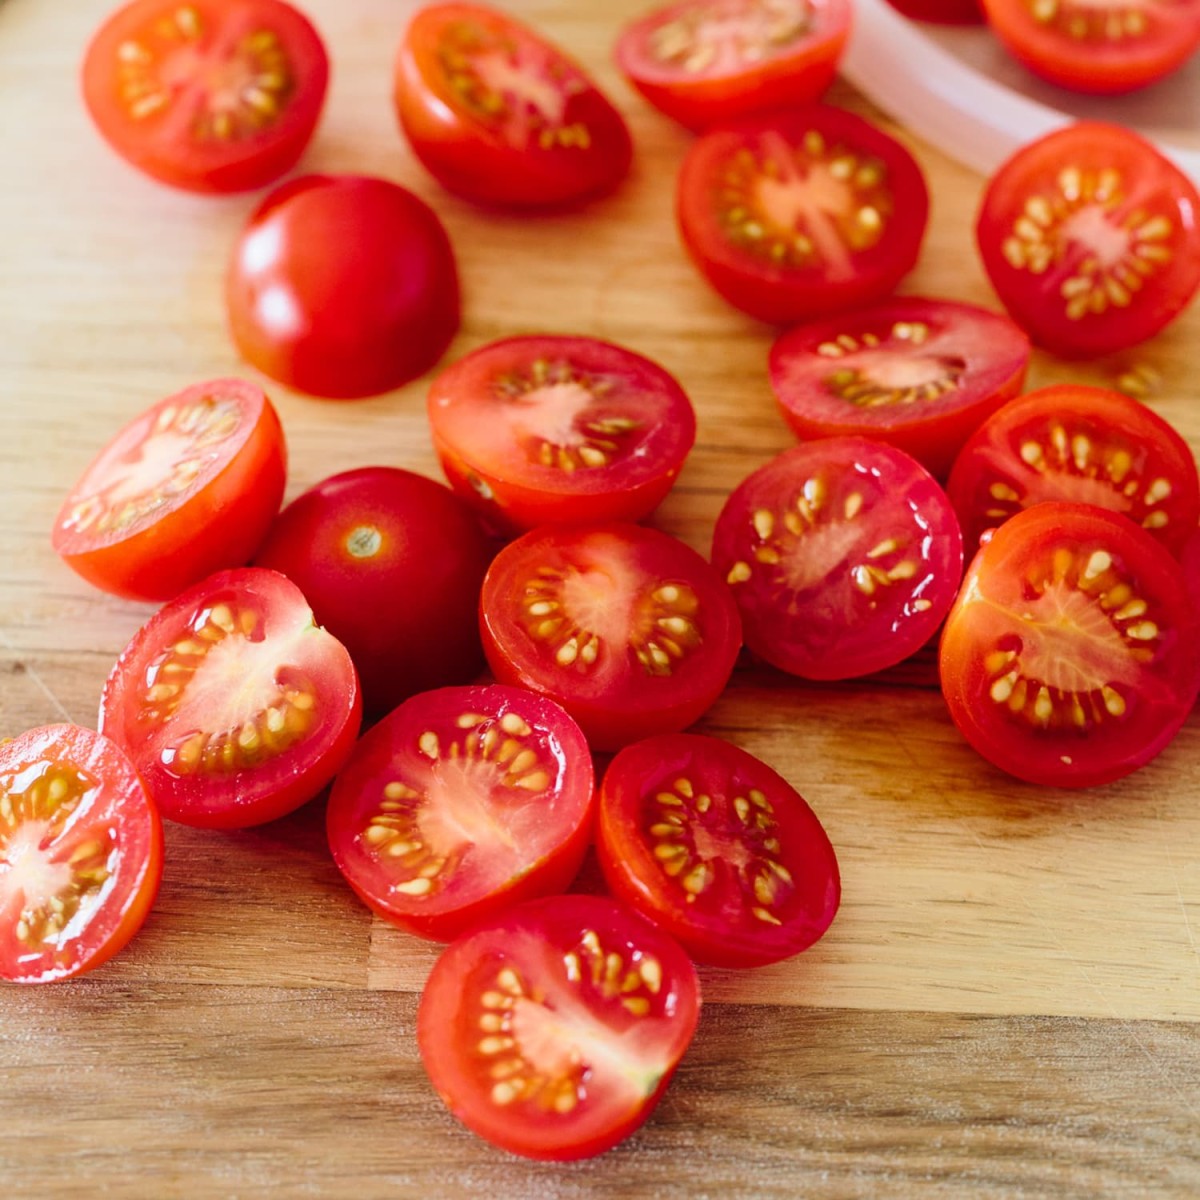 Cherry-tomatoes they are perfect for this dish, There a small tomato that has a shape like  Bing cherries and they are juicy and have very good flavor and if you sauté them, it brings out the total sweetness that takes then up another notch.